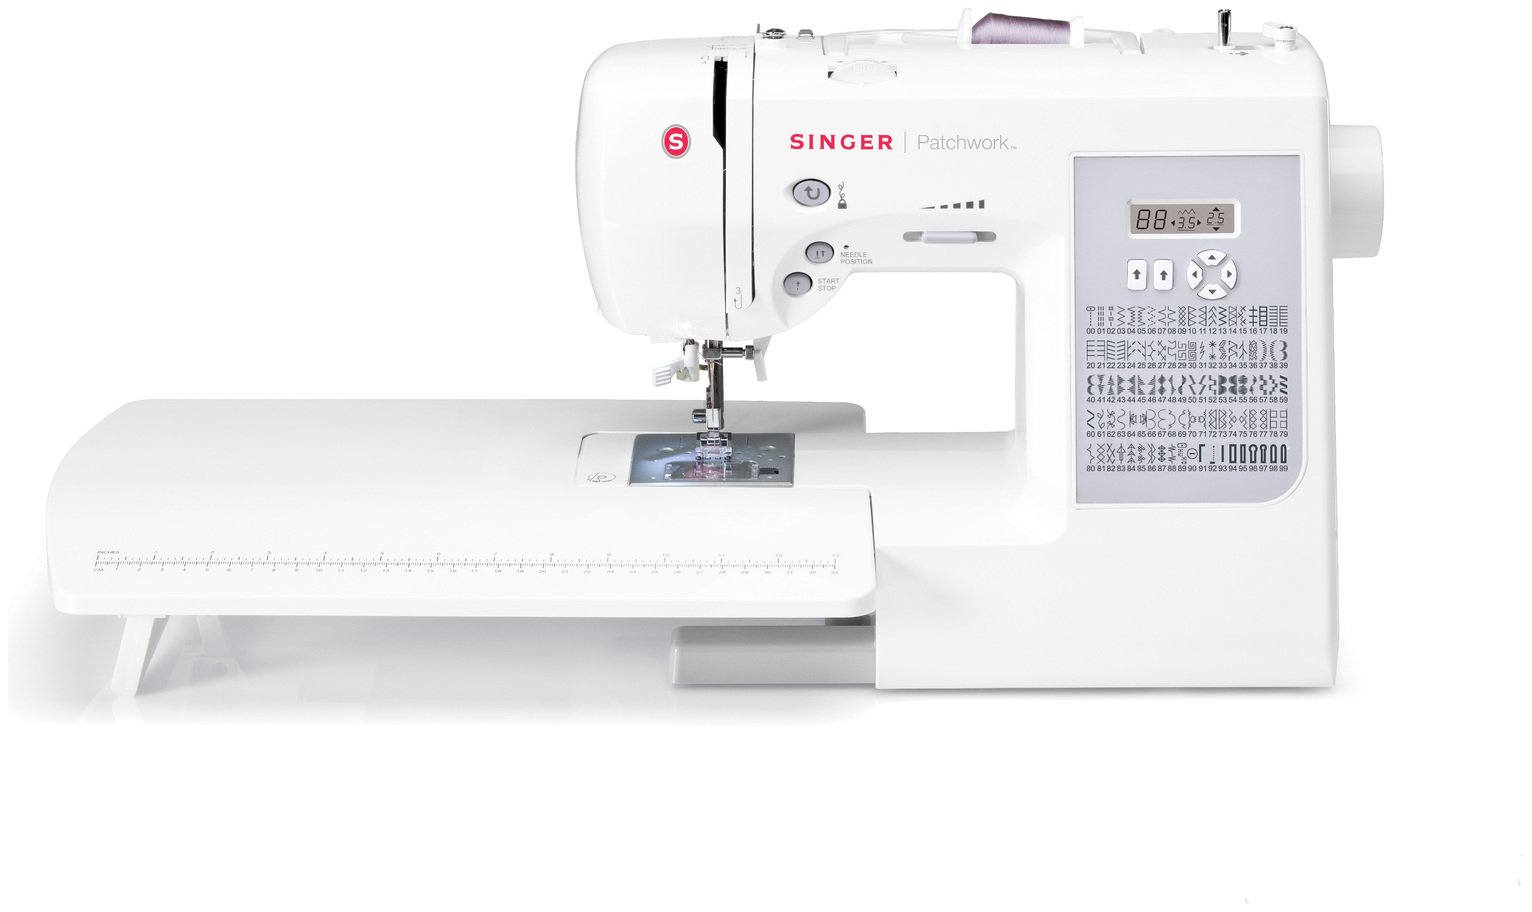 Singer 7285Q Patchwork Sewing Machine review